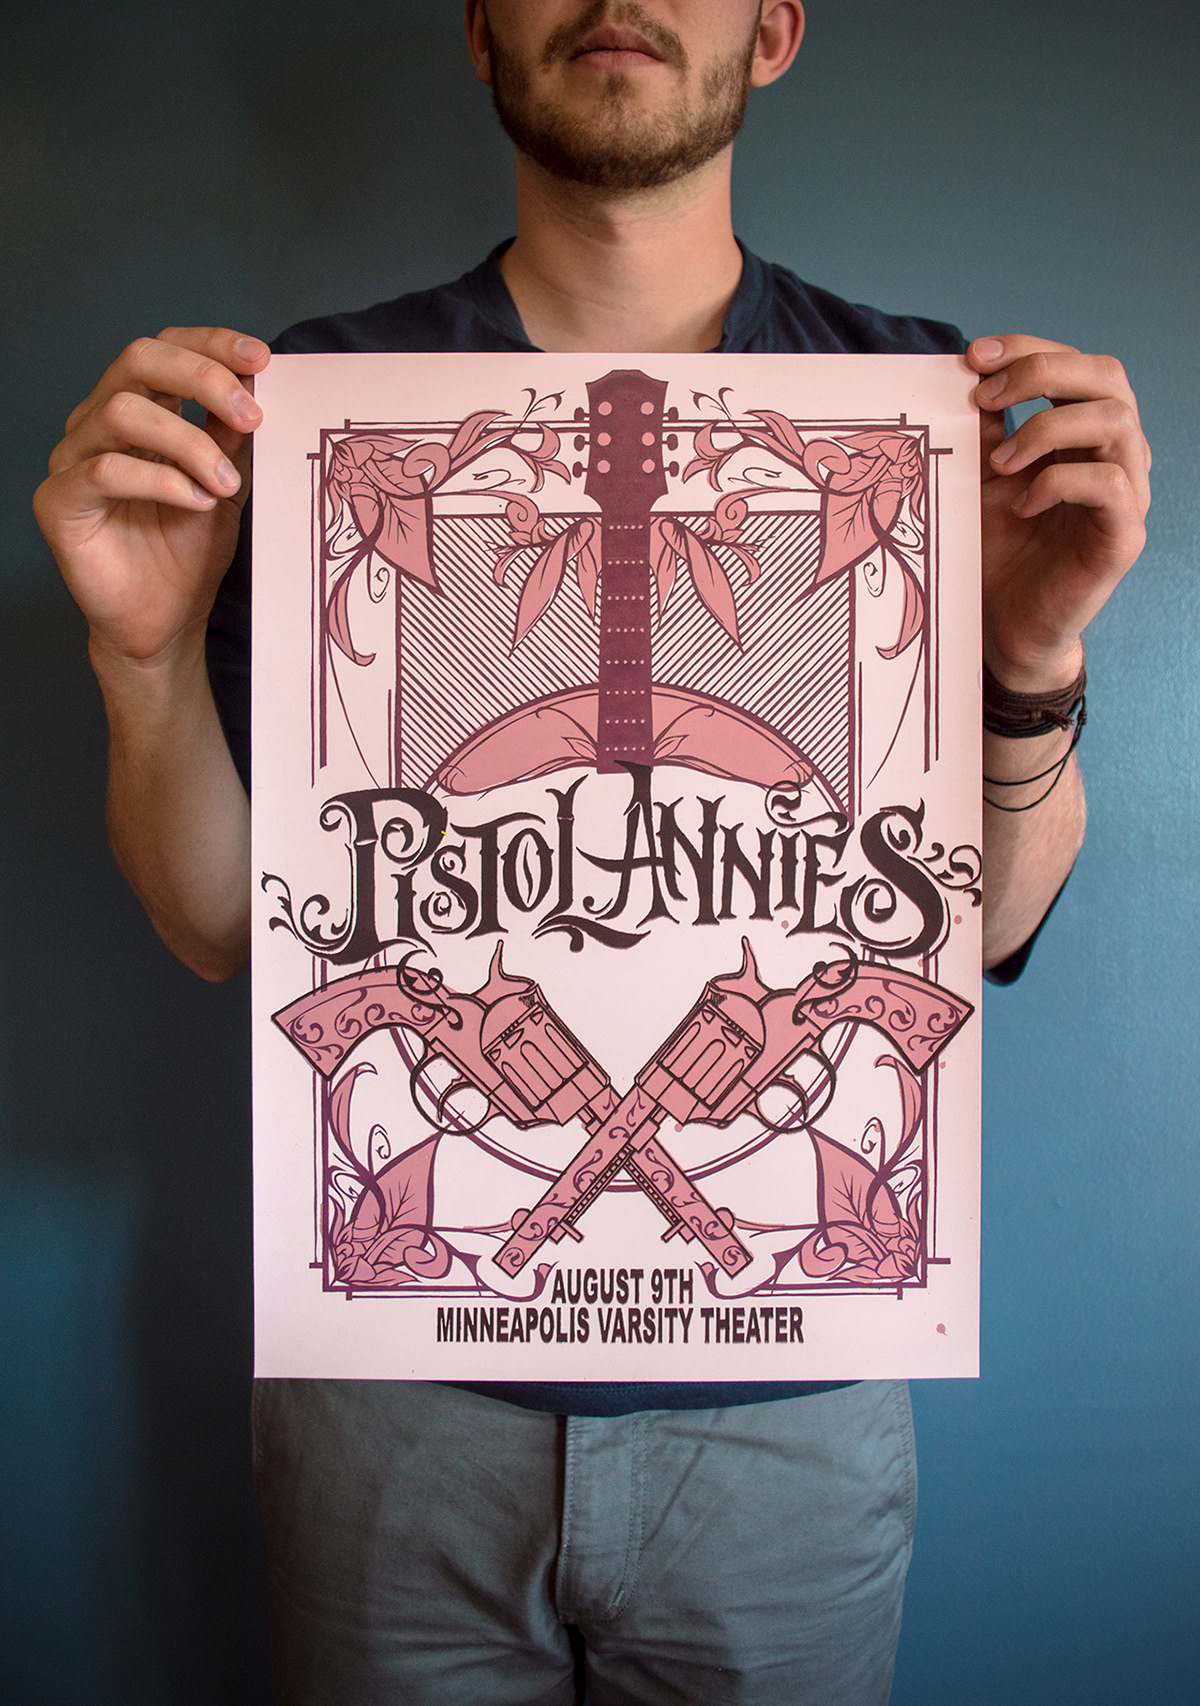 pistol annies annie's band country girl pink peach Revolver graphics design art poster print screenprint